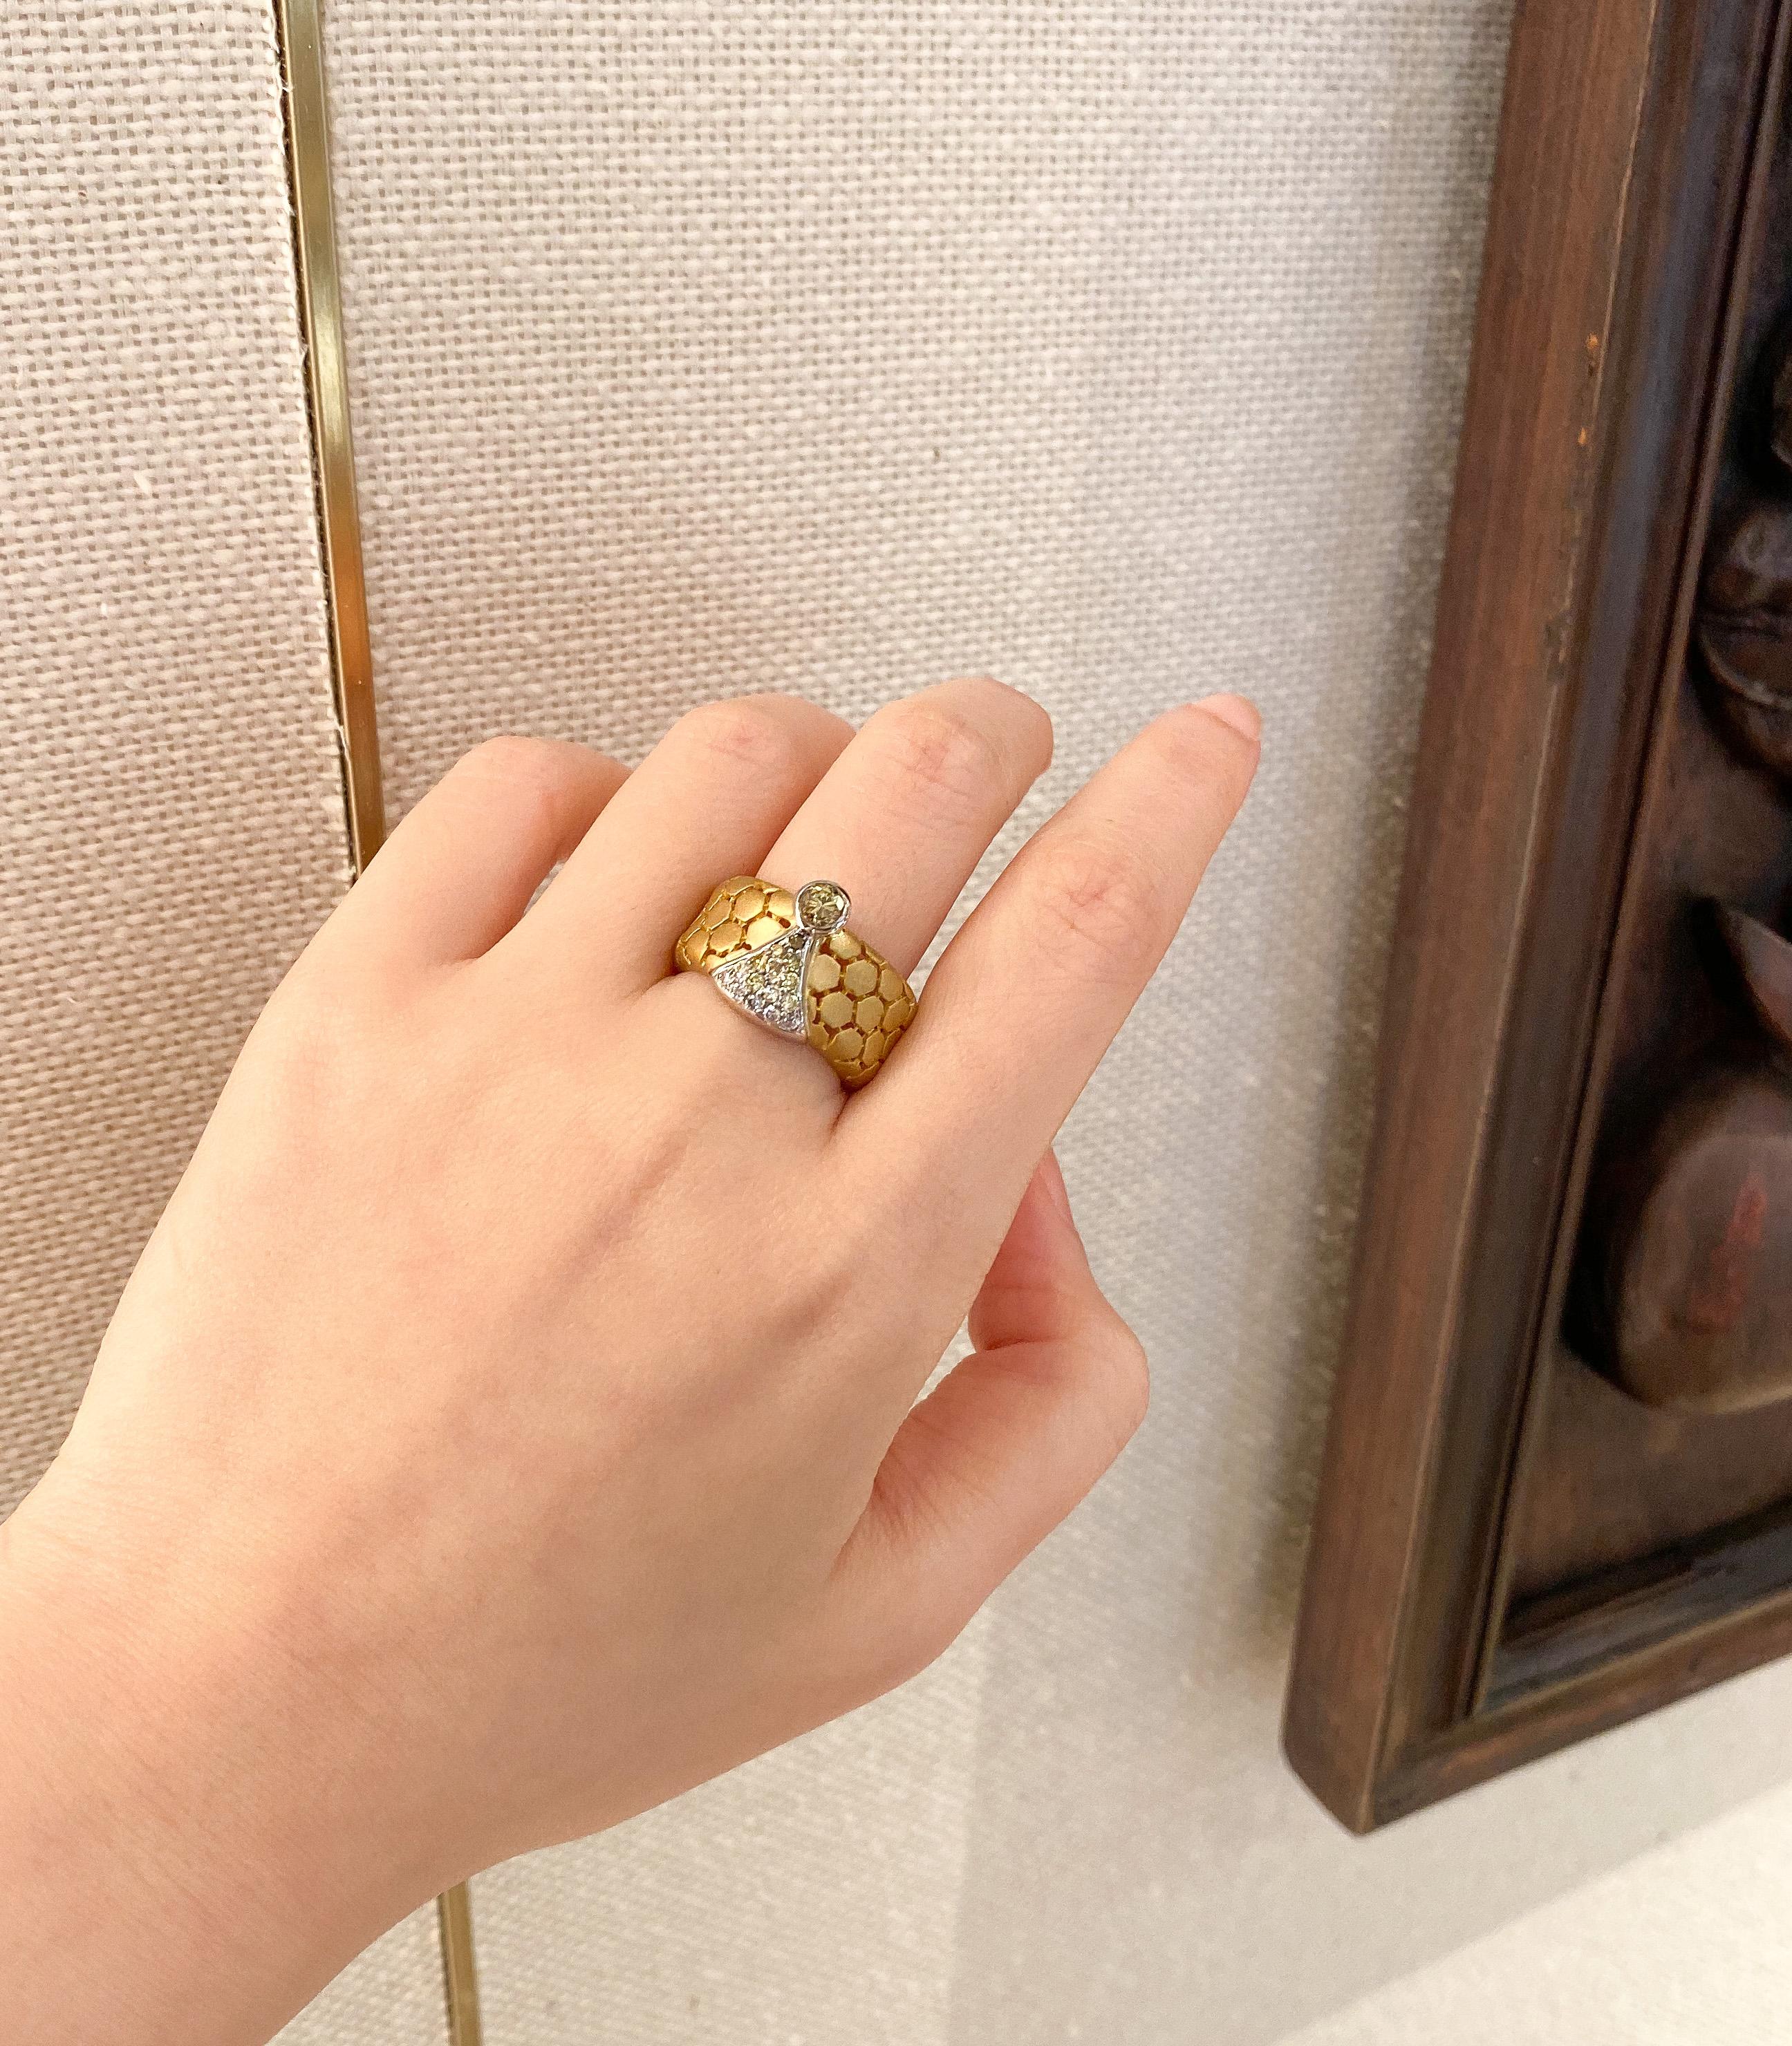 This 18 karat gold ring with matte finishing features a honeycomb pattern with a fancy color round brilliant cut diamond center stone, followed by a sparkling gradient of 15 smaller, pavé-set diamonds that graduate from fancy color to white round